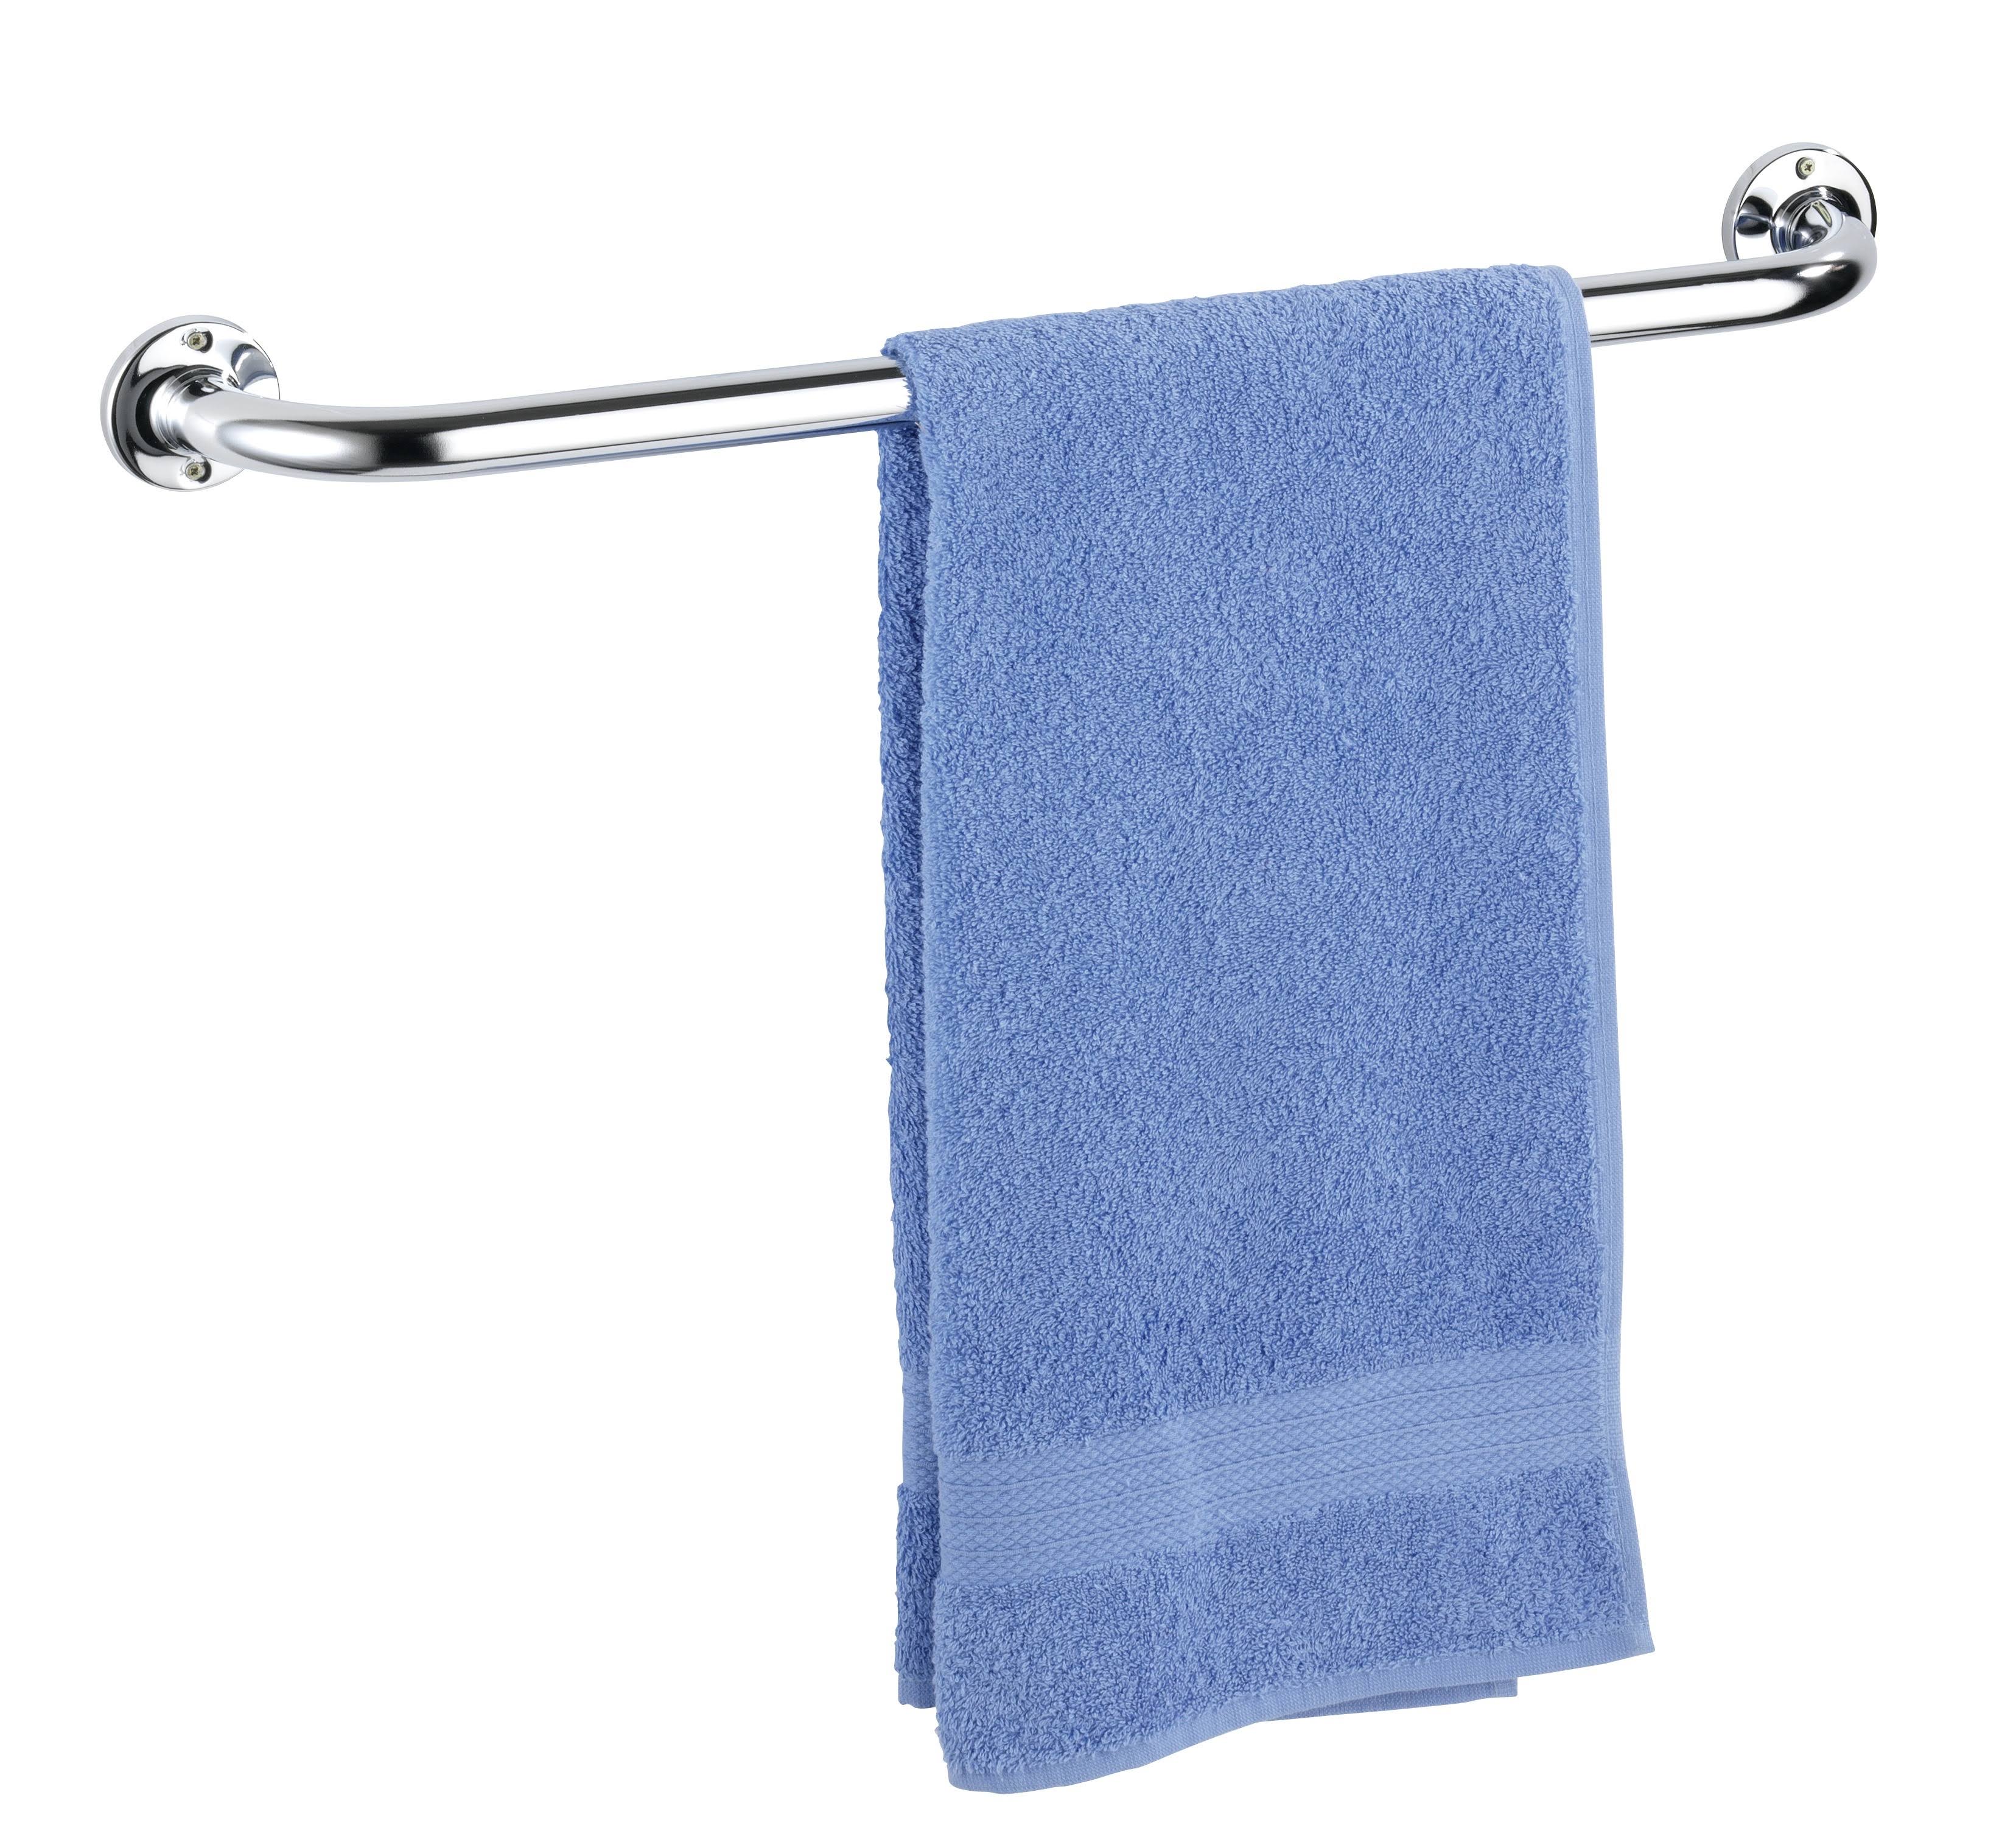 Towel holder rod 20 multiple choices stainless steel